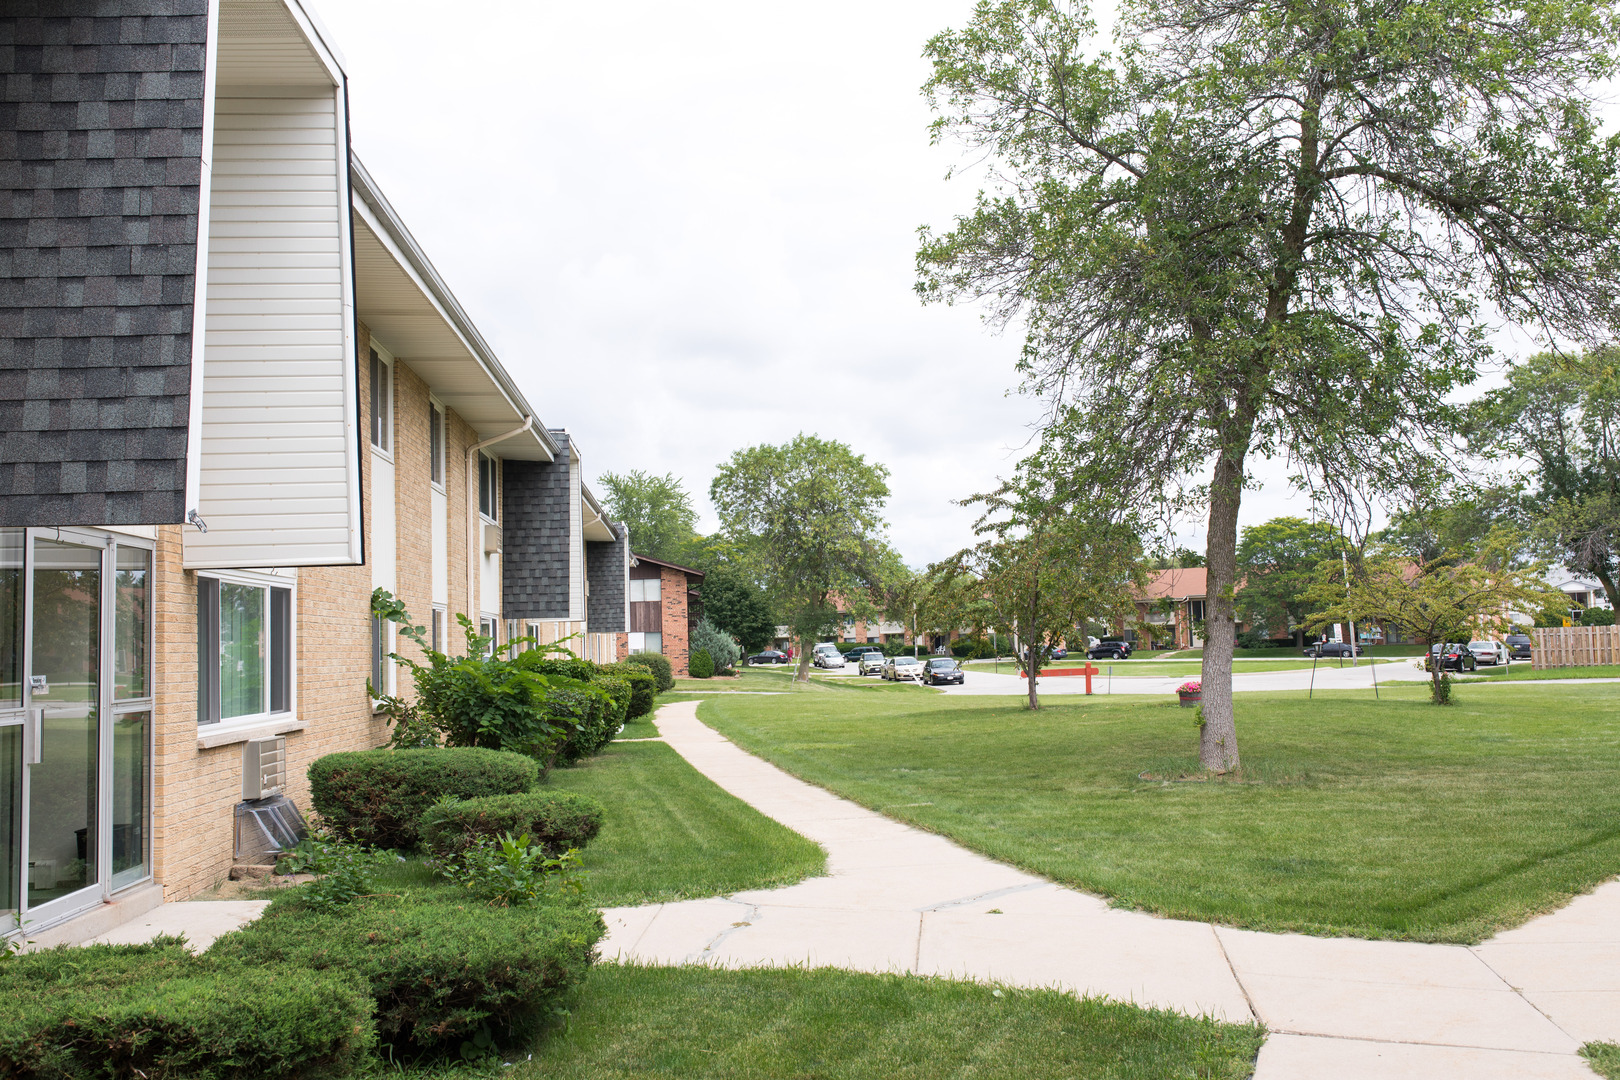 Spruce Court Apartment - Greenfield WI - Call 262-420-0390 to schedule a showing